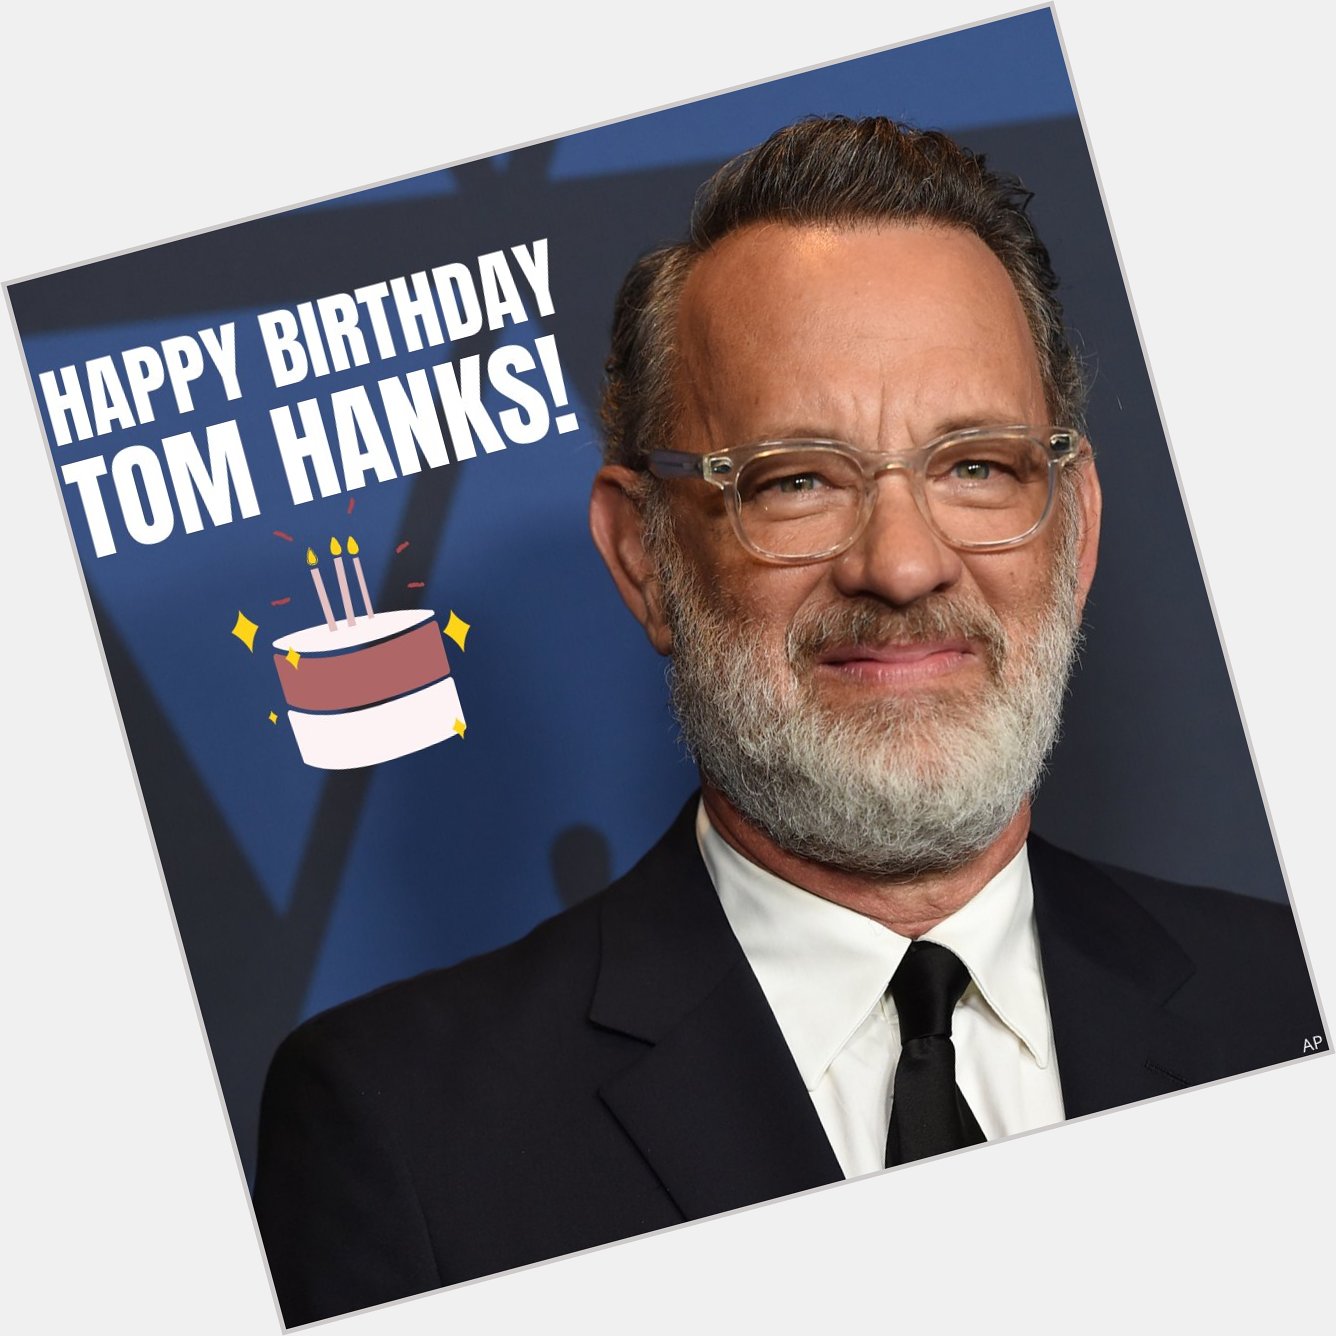 A big happy birthday to Tom Hanks! He\s been in a number of huuuugggeee hit movies. Which one is your favorite? 